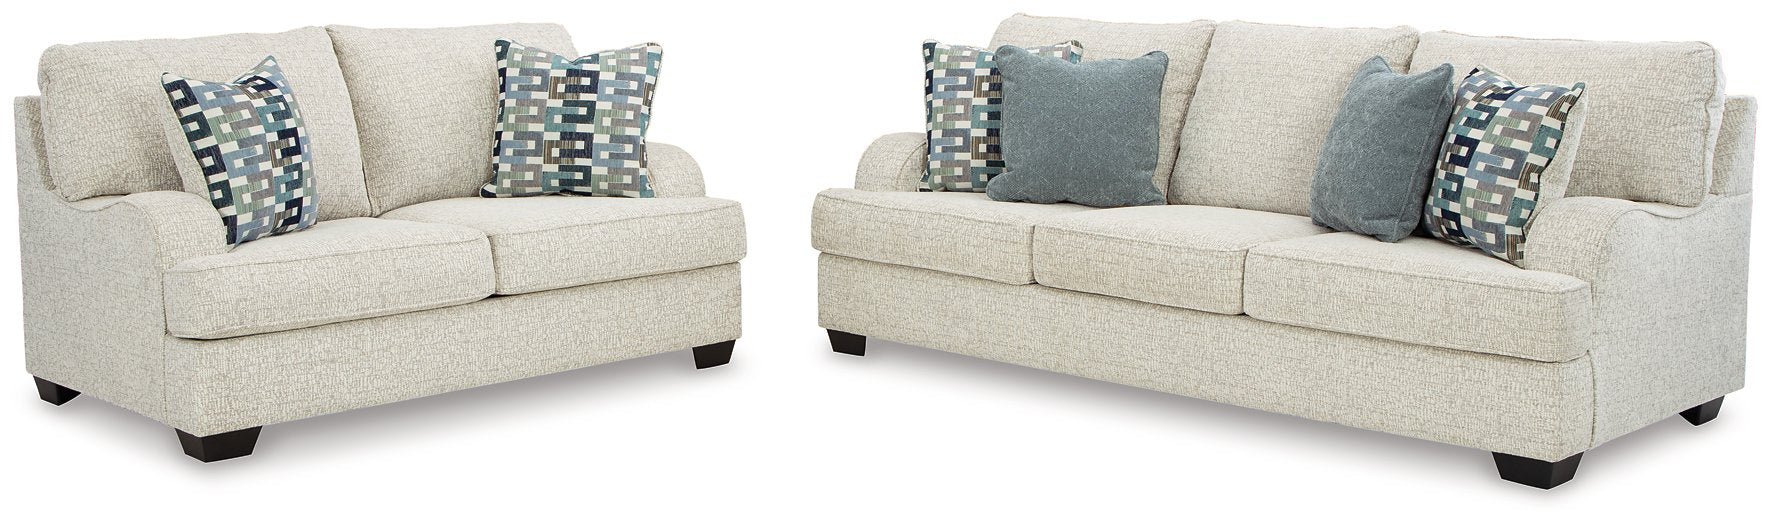 Valerano 2-Piece Upholstery Package